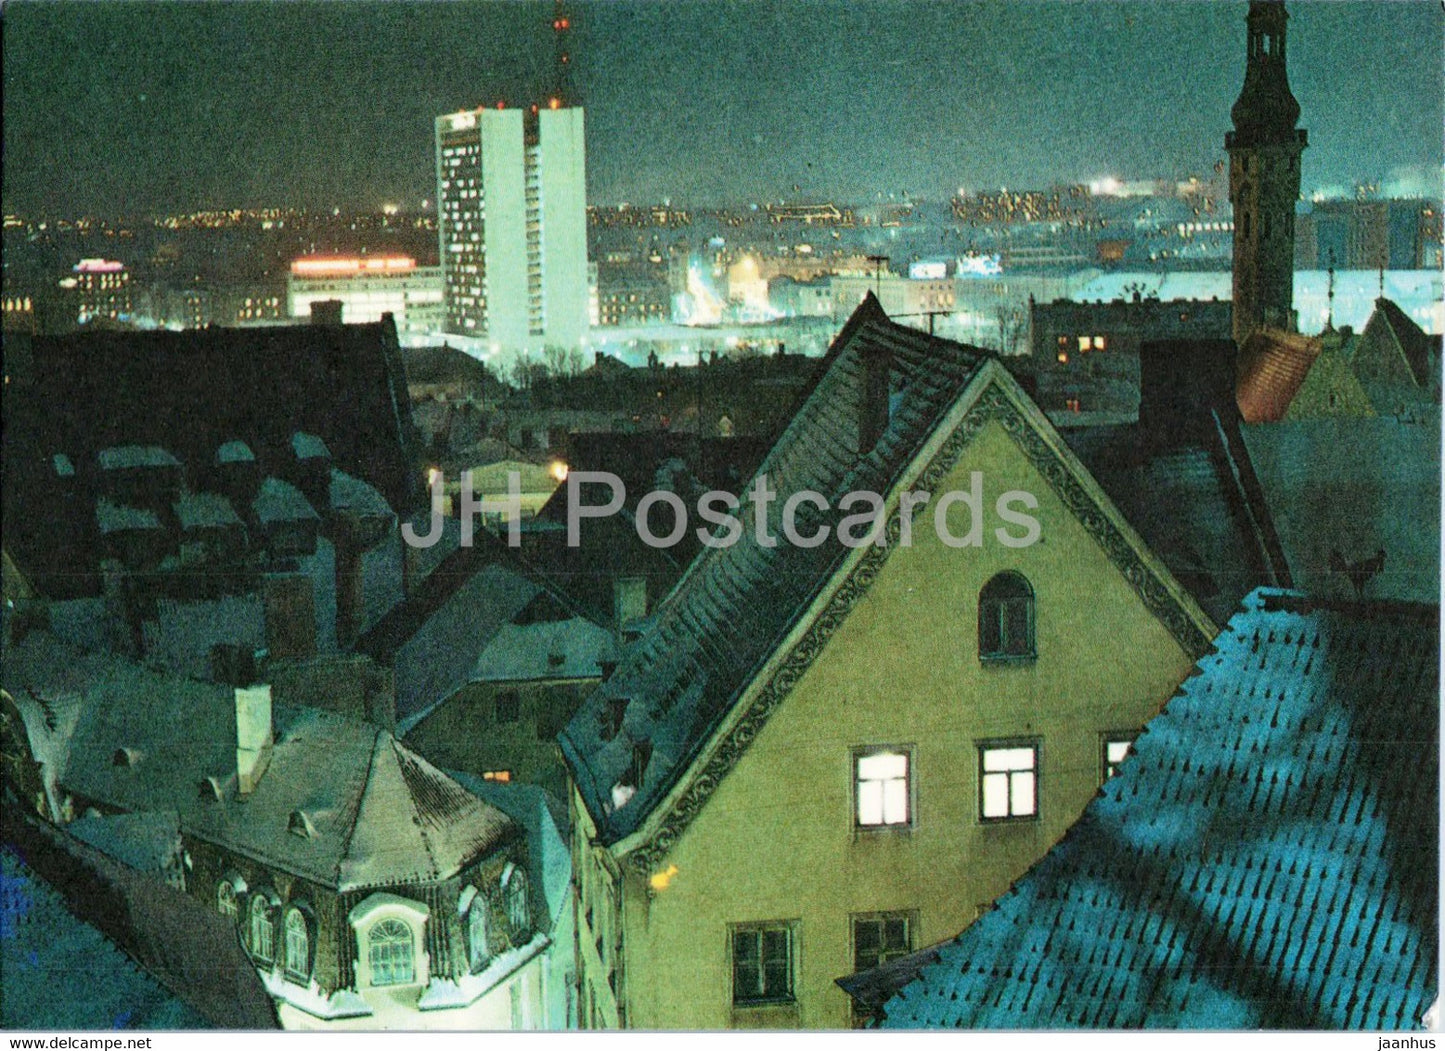 Tallinn - Evening View from Old Town - New Year Greeting Card - 1986 - Estonia USSR - unused - JH Postcards